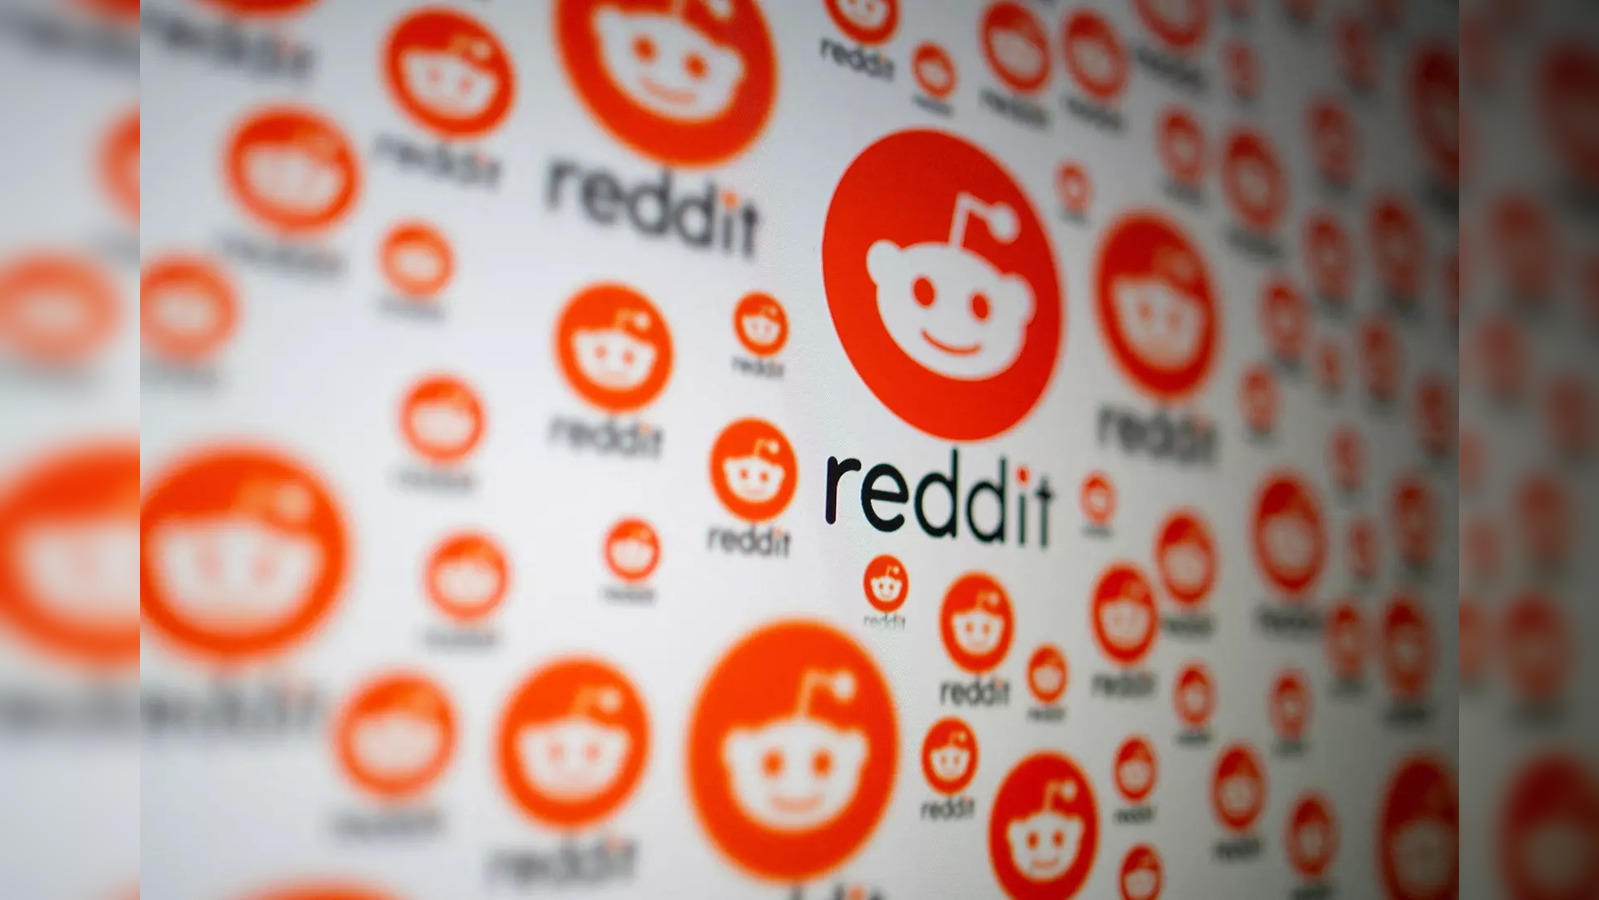 Reddit to lay off about 5% of its workforce